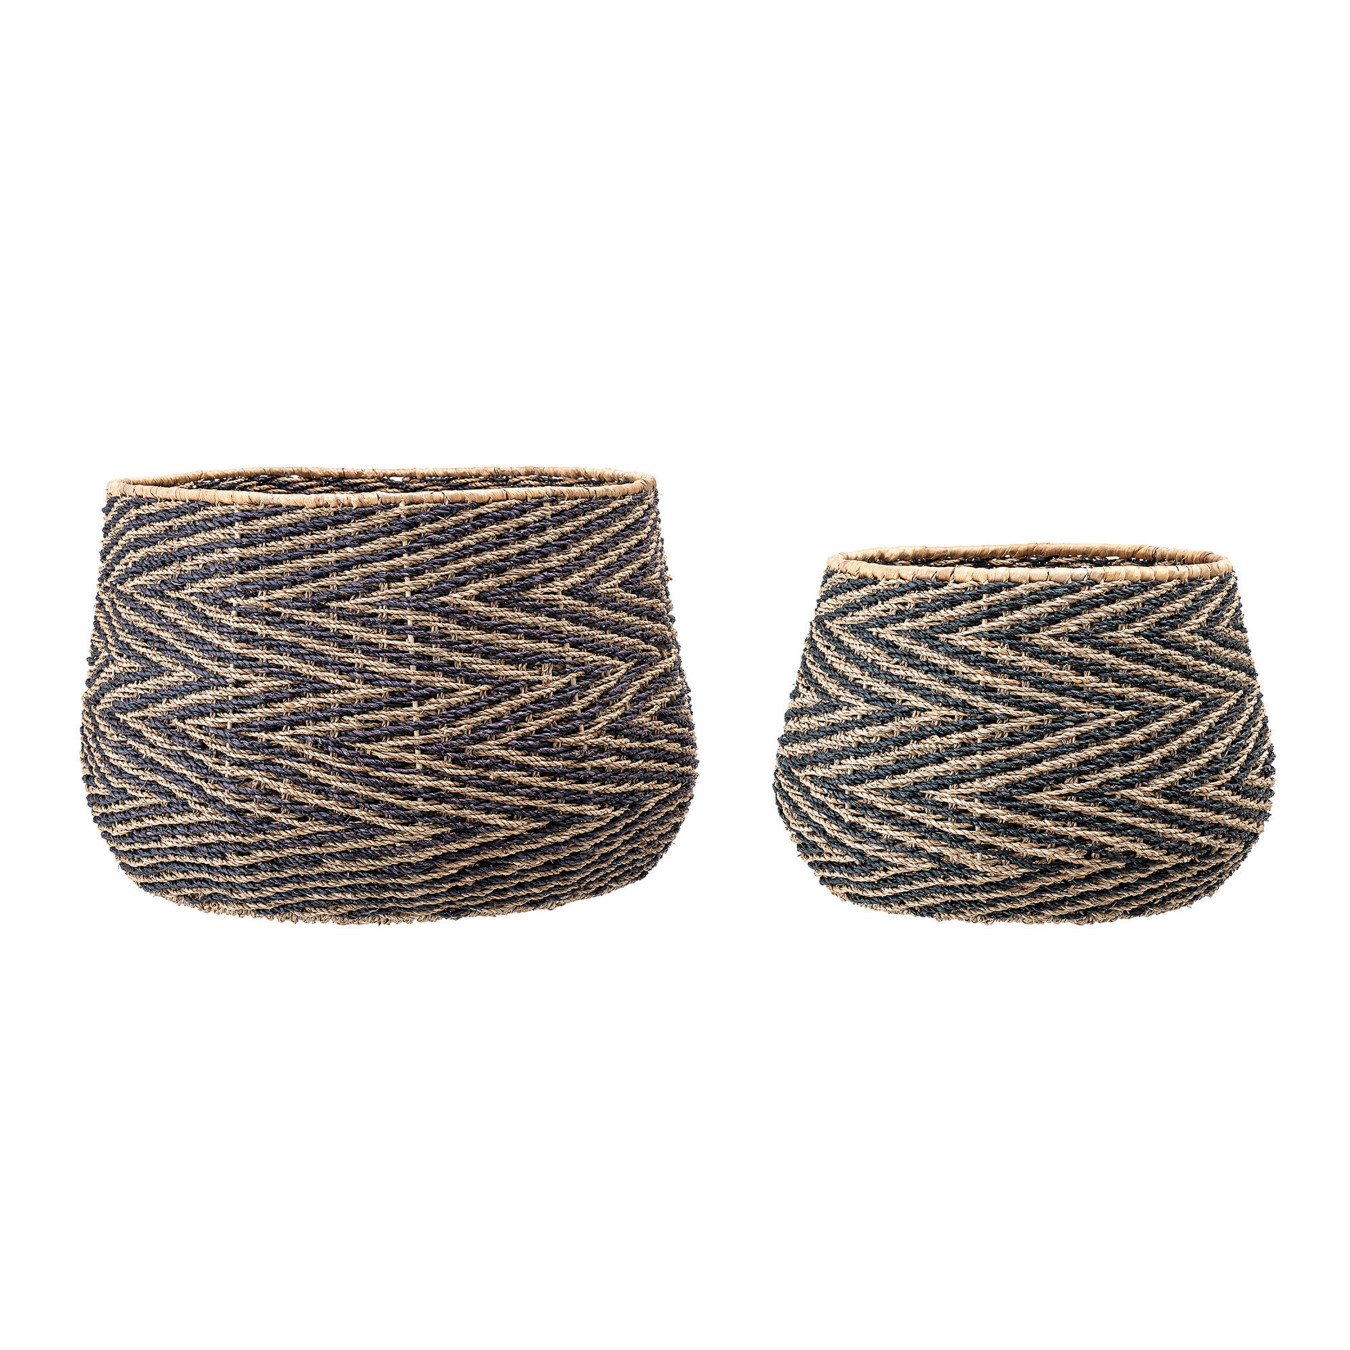 Handwoven Black & Natural Chevron Patterned Seagrass Baskets (Set of 2 Sizes)